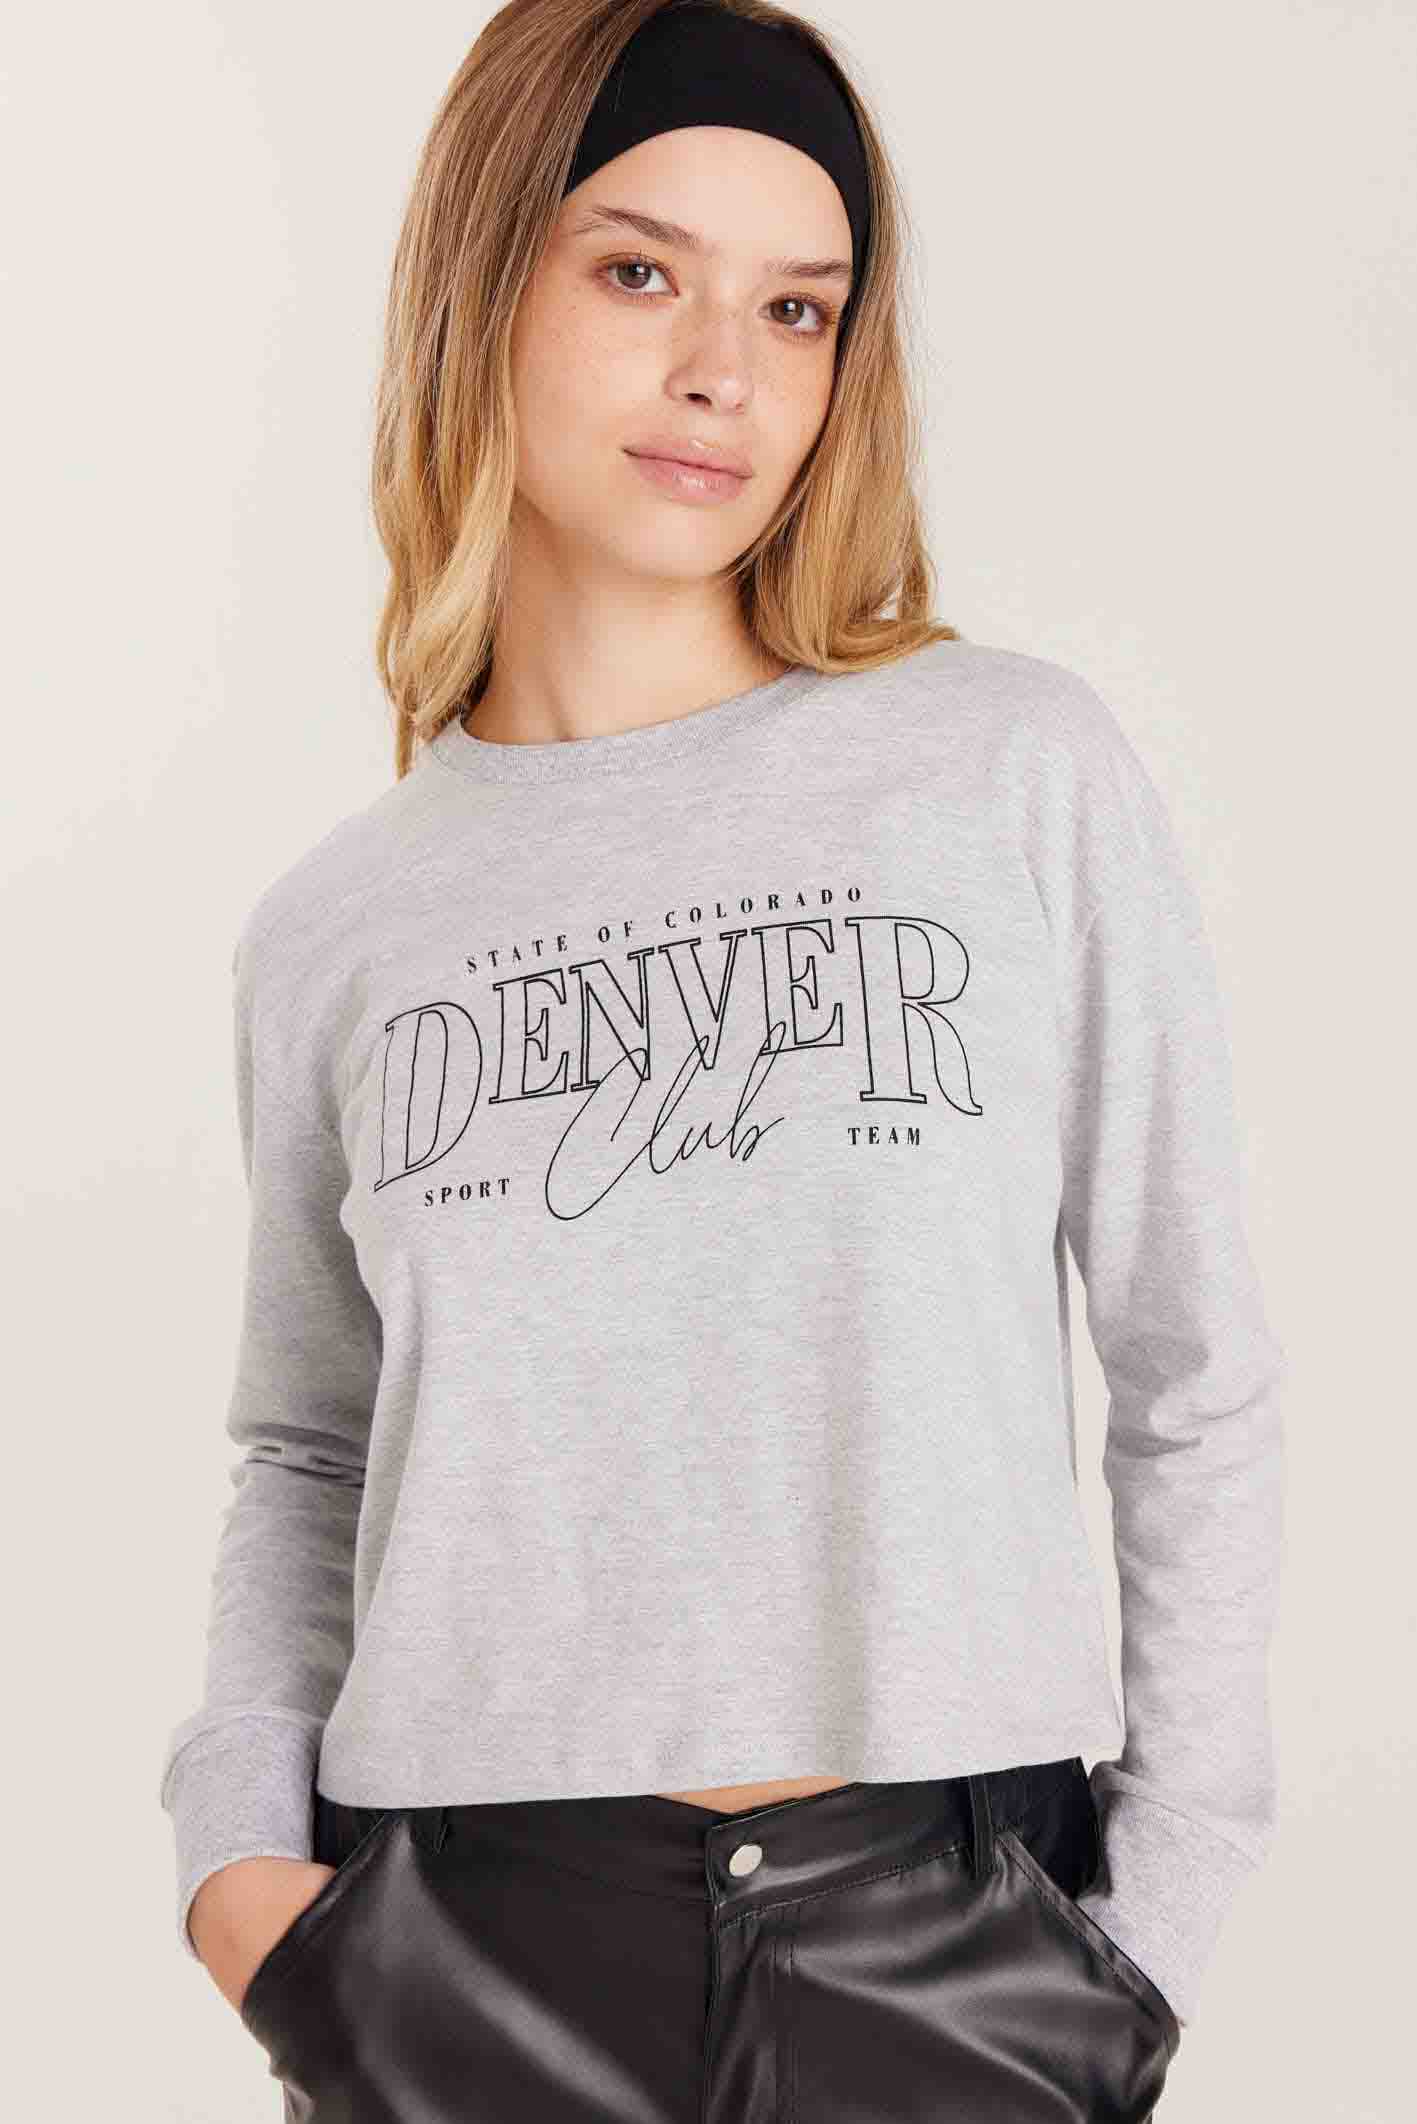 comoquieres_remera-kendall-xs-l_10-10-2024__picture-43726